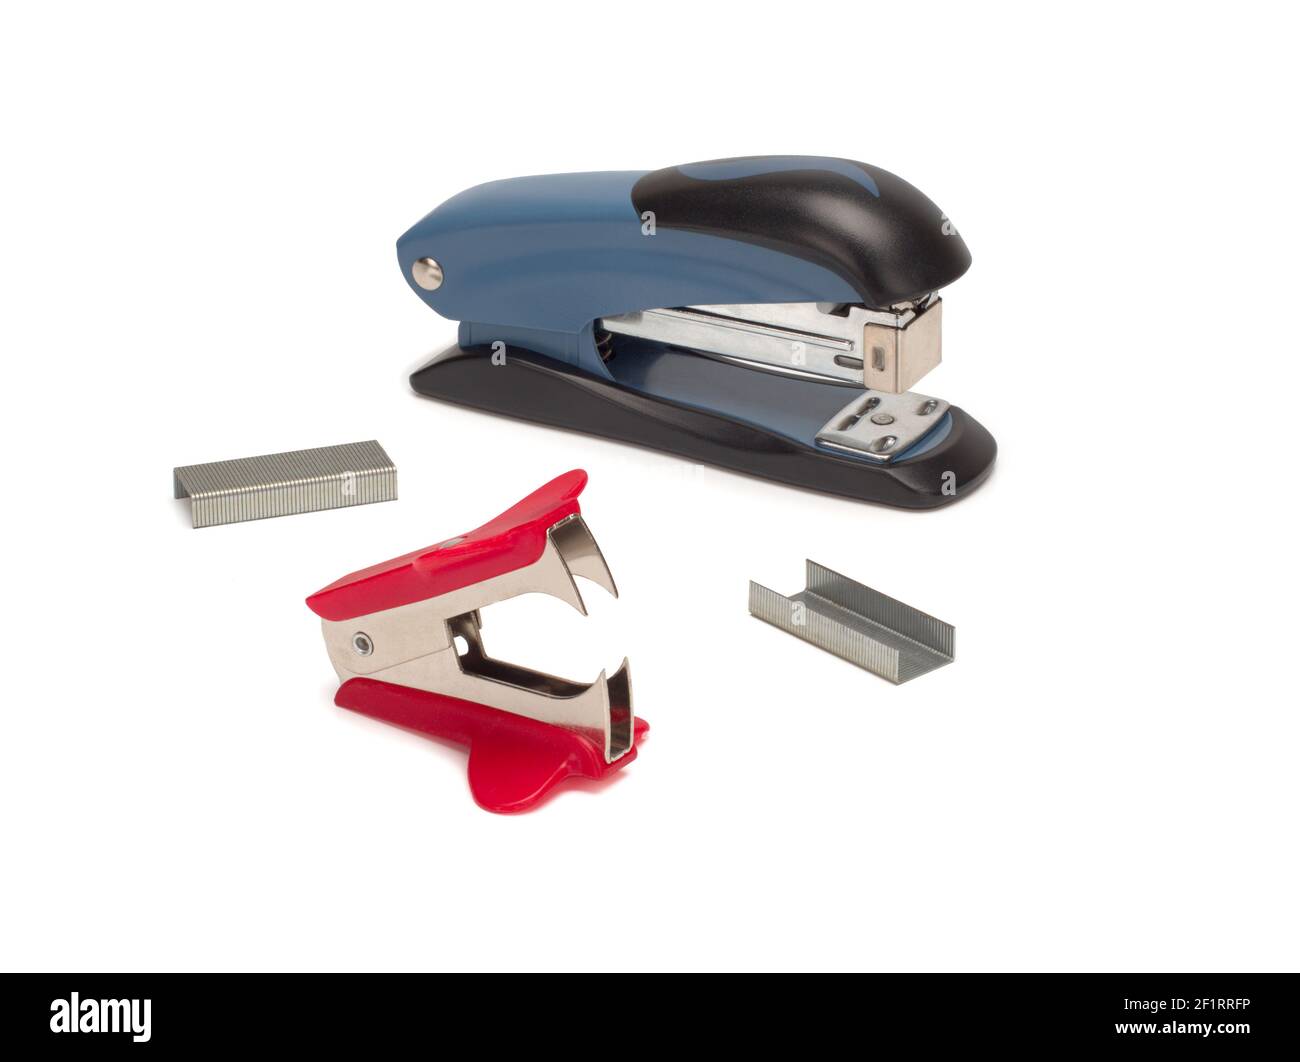 Top view of stapler, staple remover and staples isolate on white background. Stock Photo